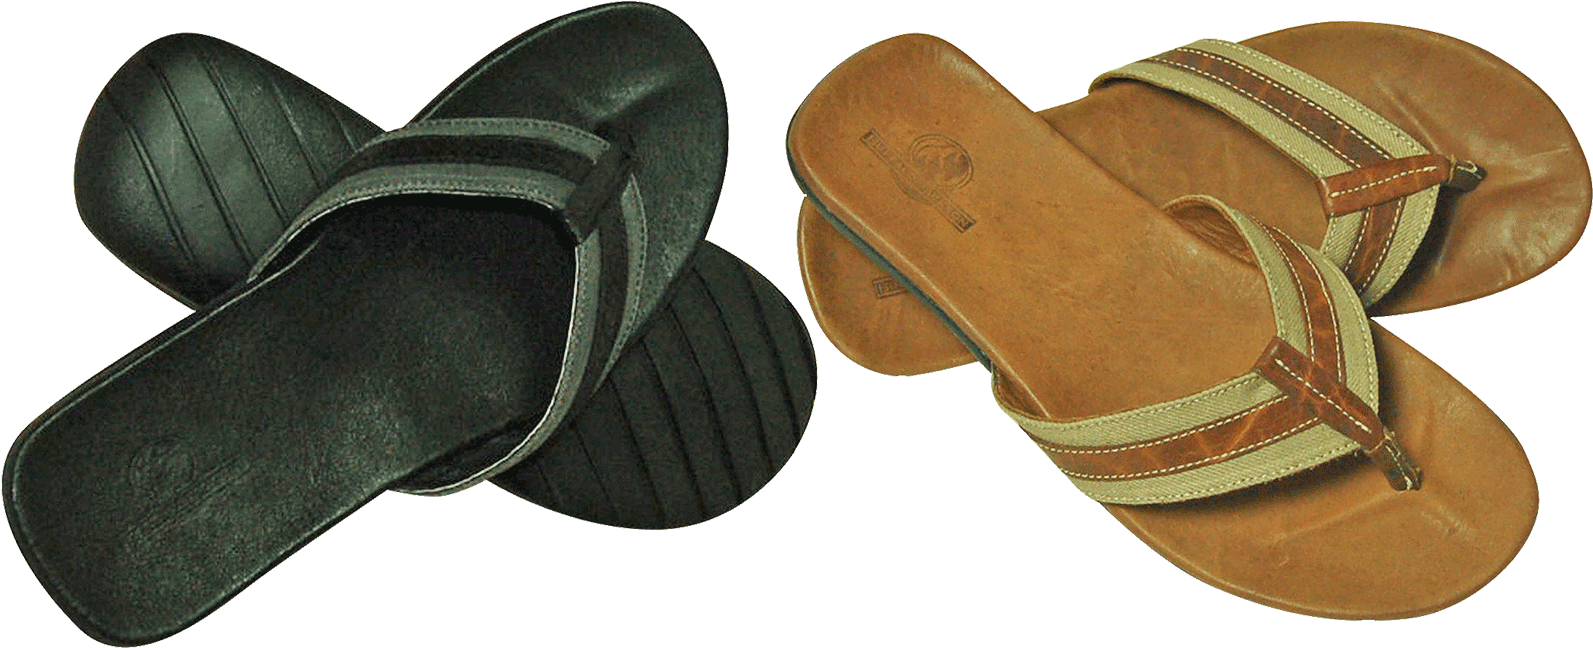 A Pair Of Sandals On A Black Background